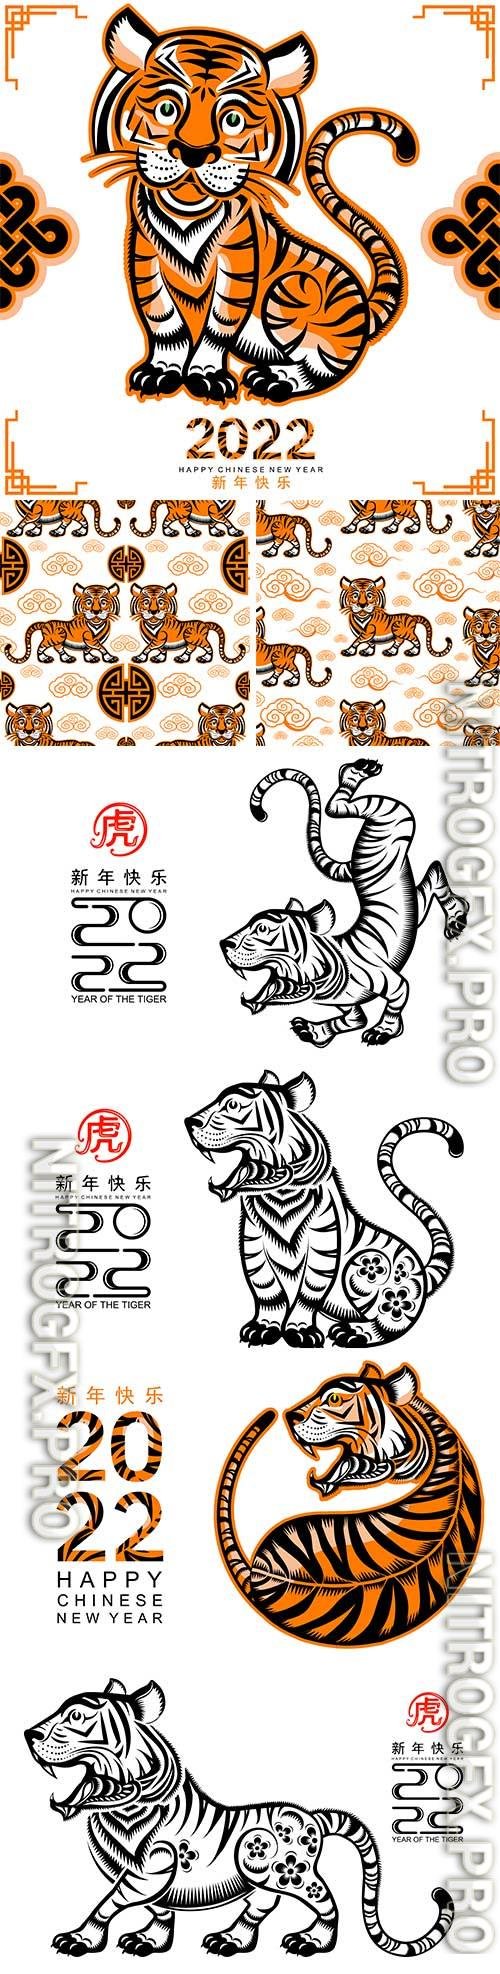 New year 2022 year of the tiger, seamless pattern premium vector